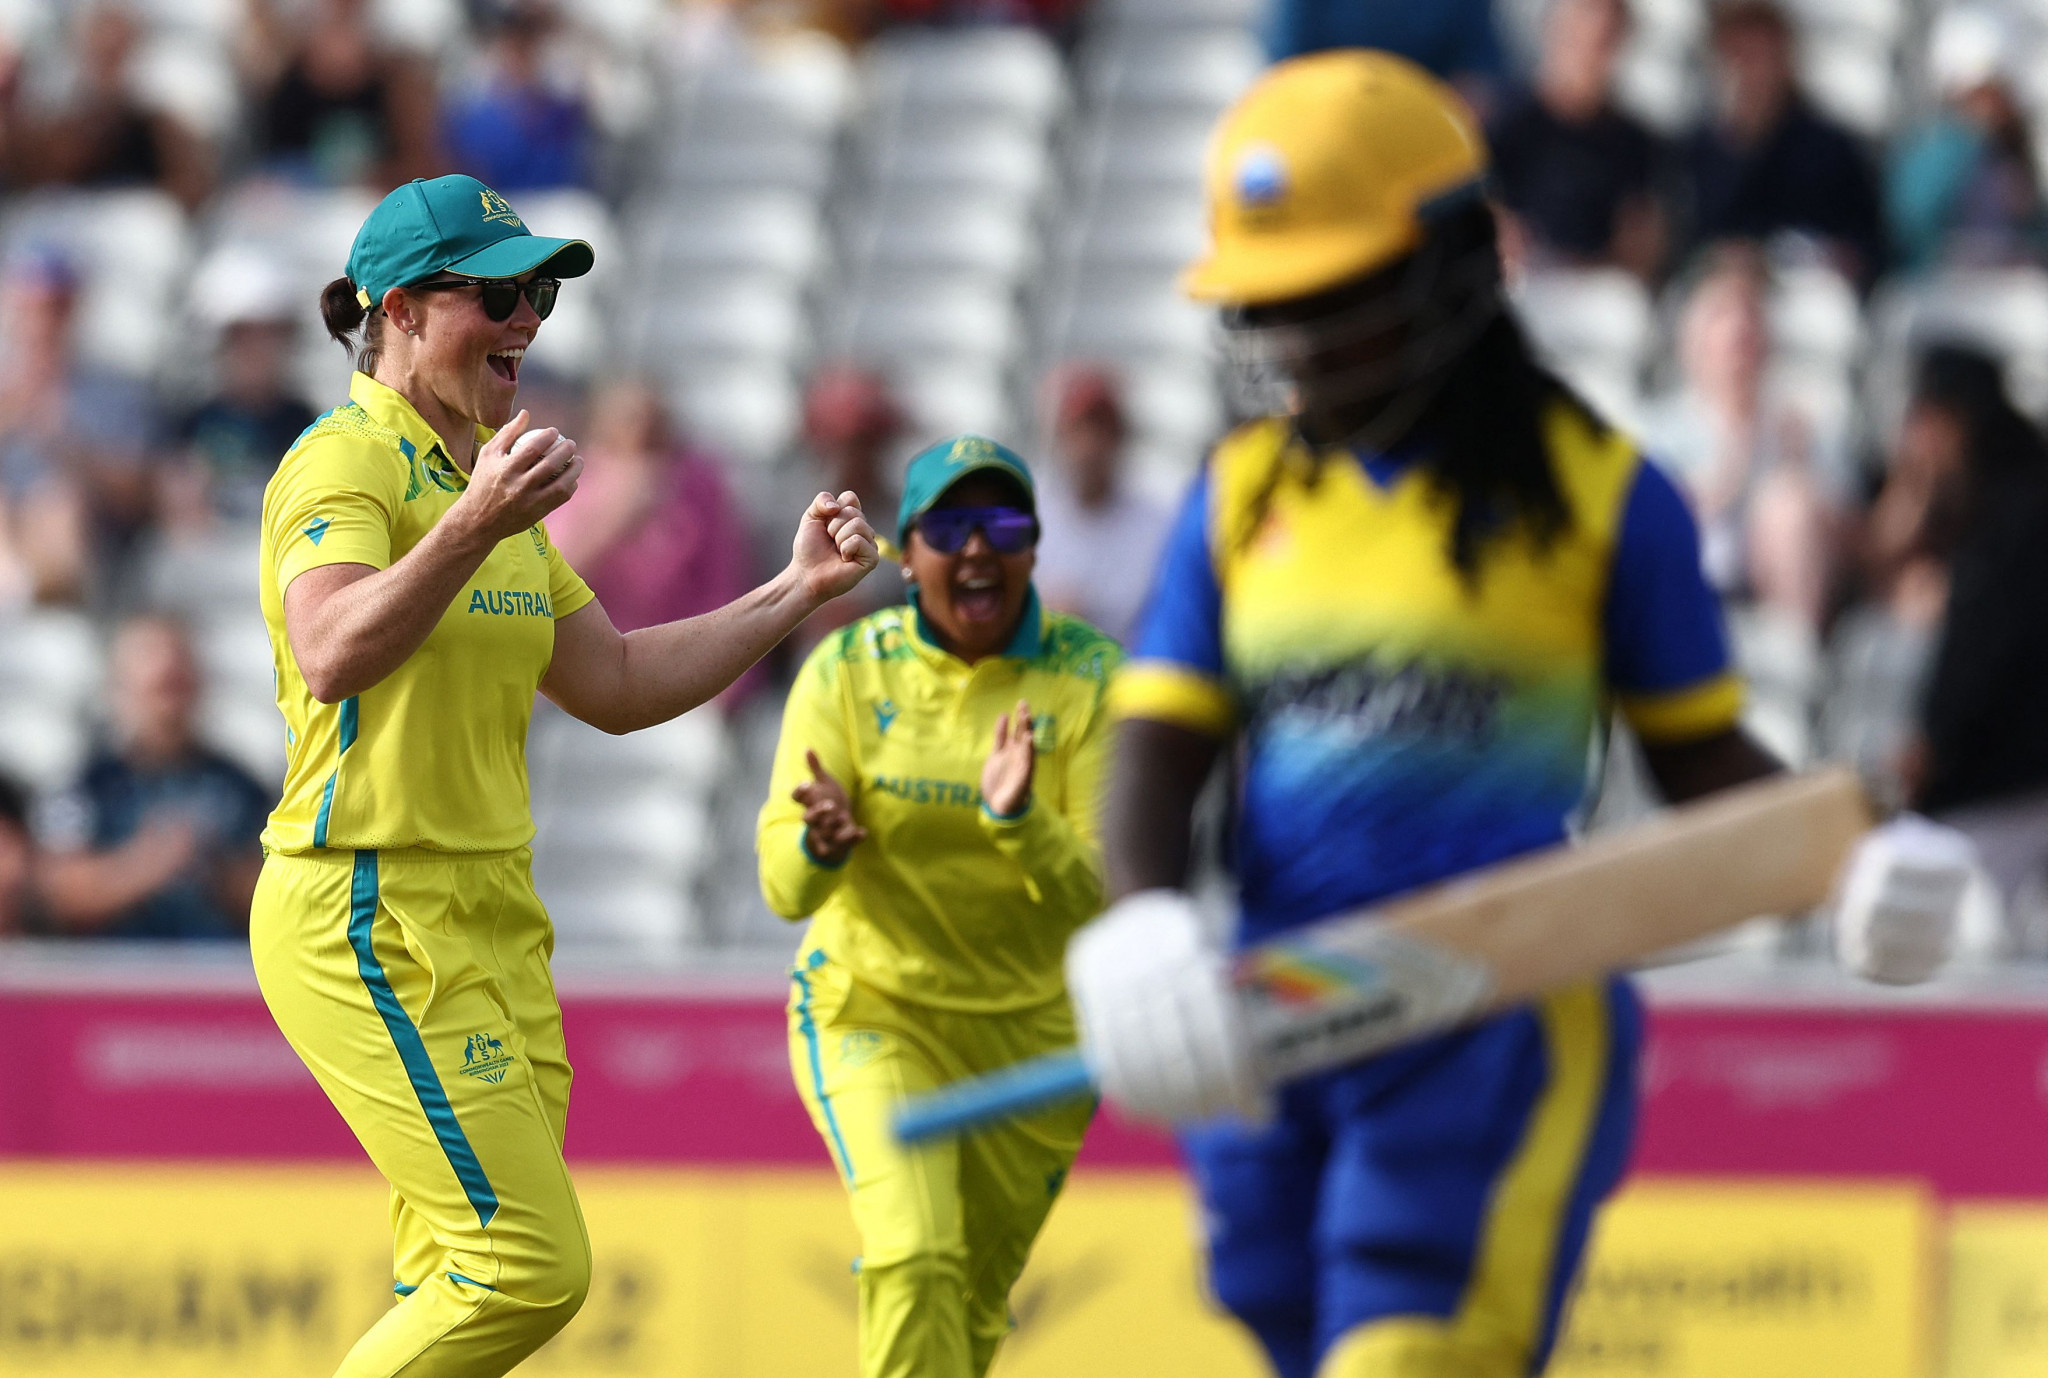 Australia have qualified for the semi-finals ©Getty Images